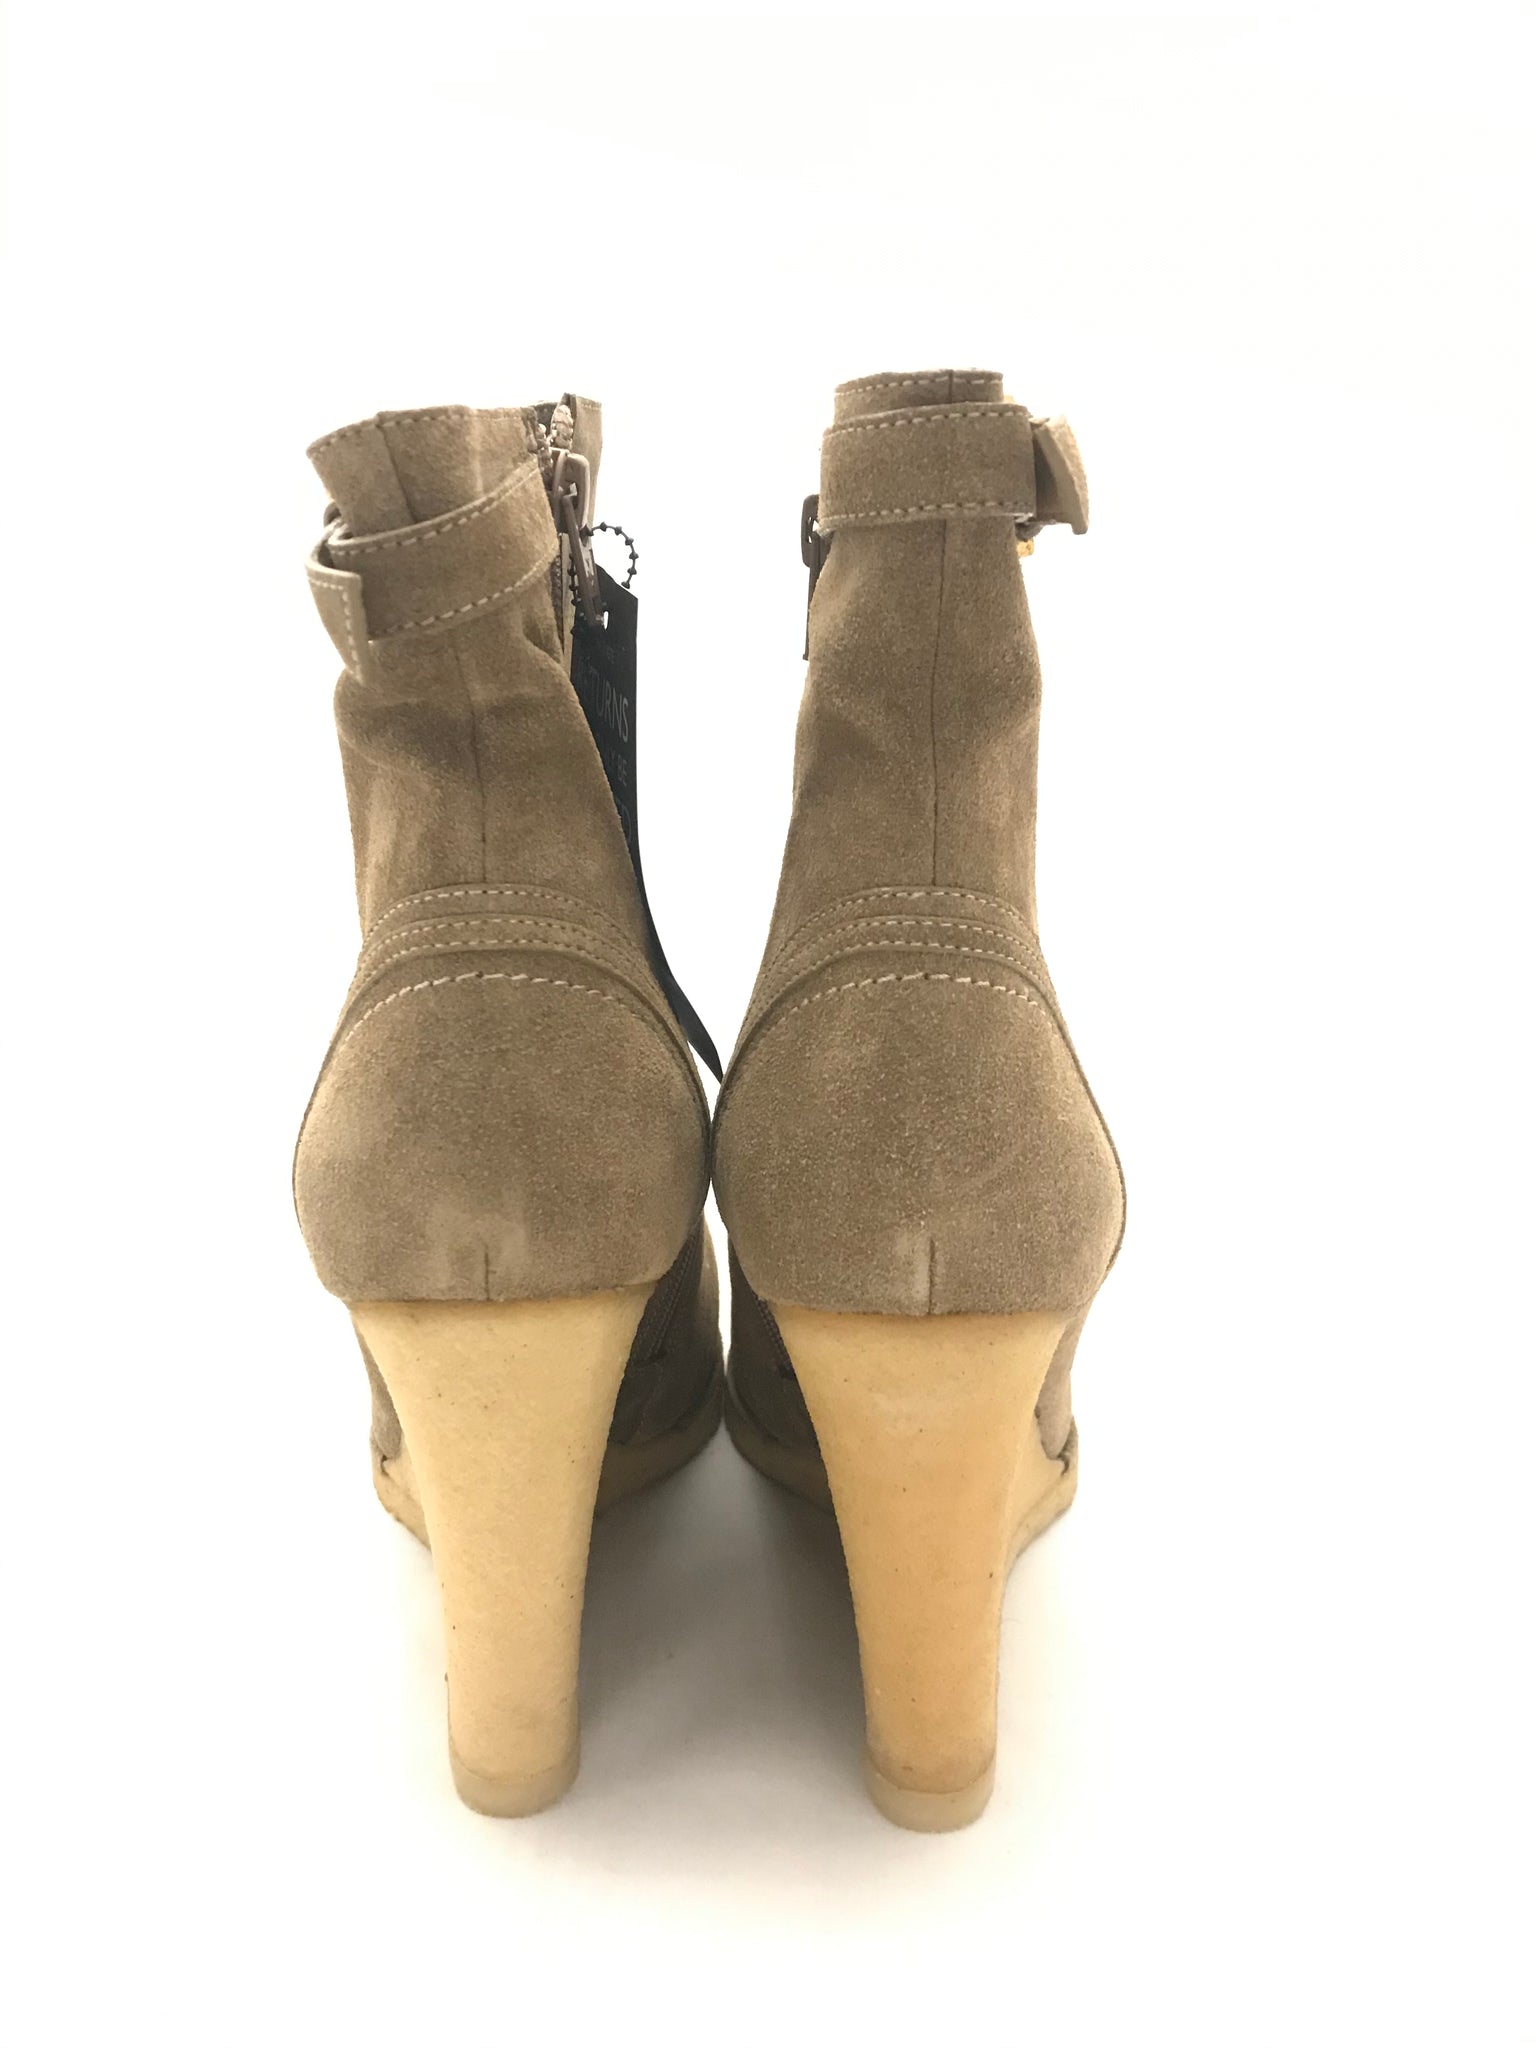 Isabella's Wardrobe Chloe Suede Wedge Ankle Boots.